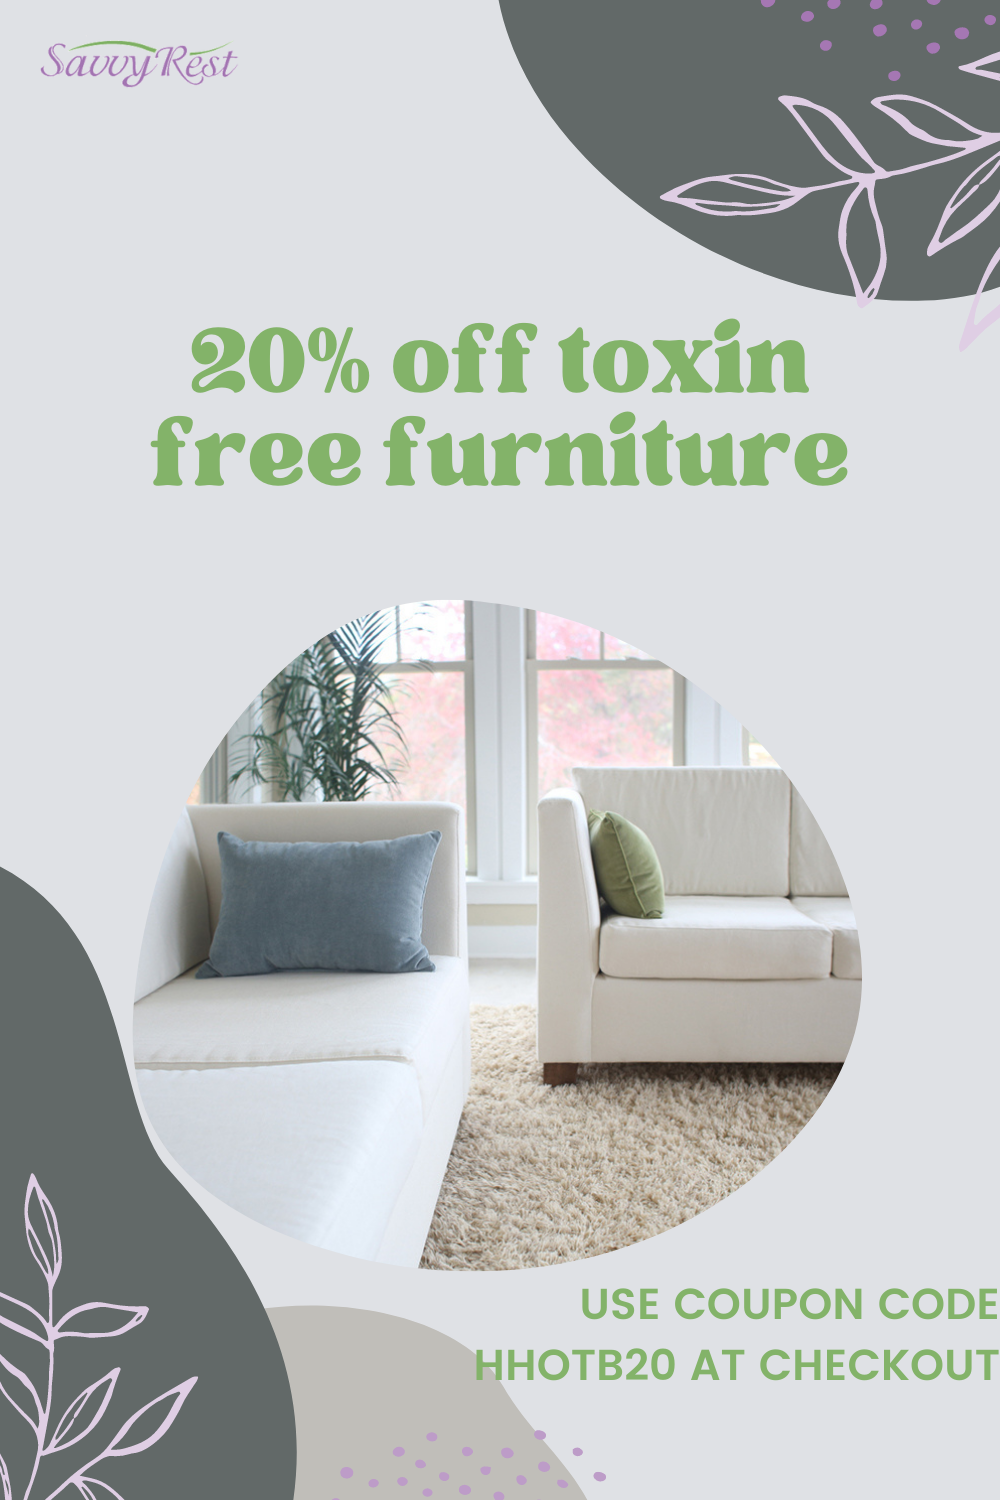 coupon code HHOTB20 for 20% off savvy rest toxin free couch and furniture